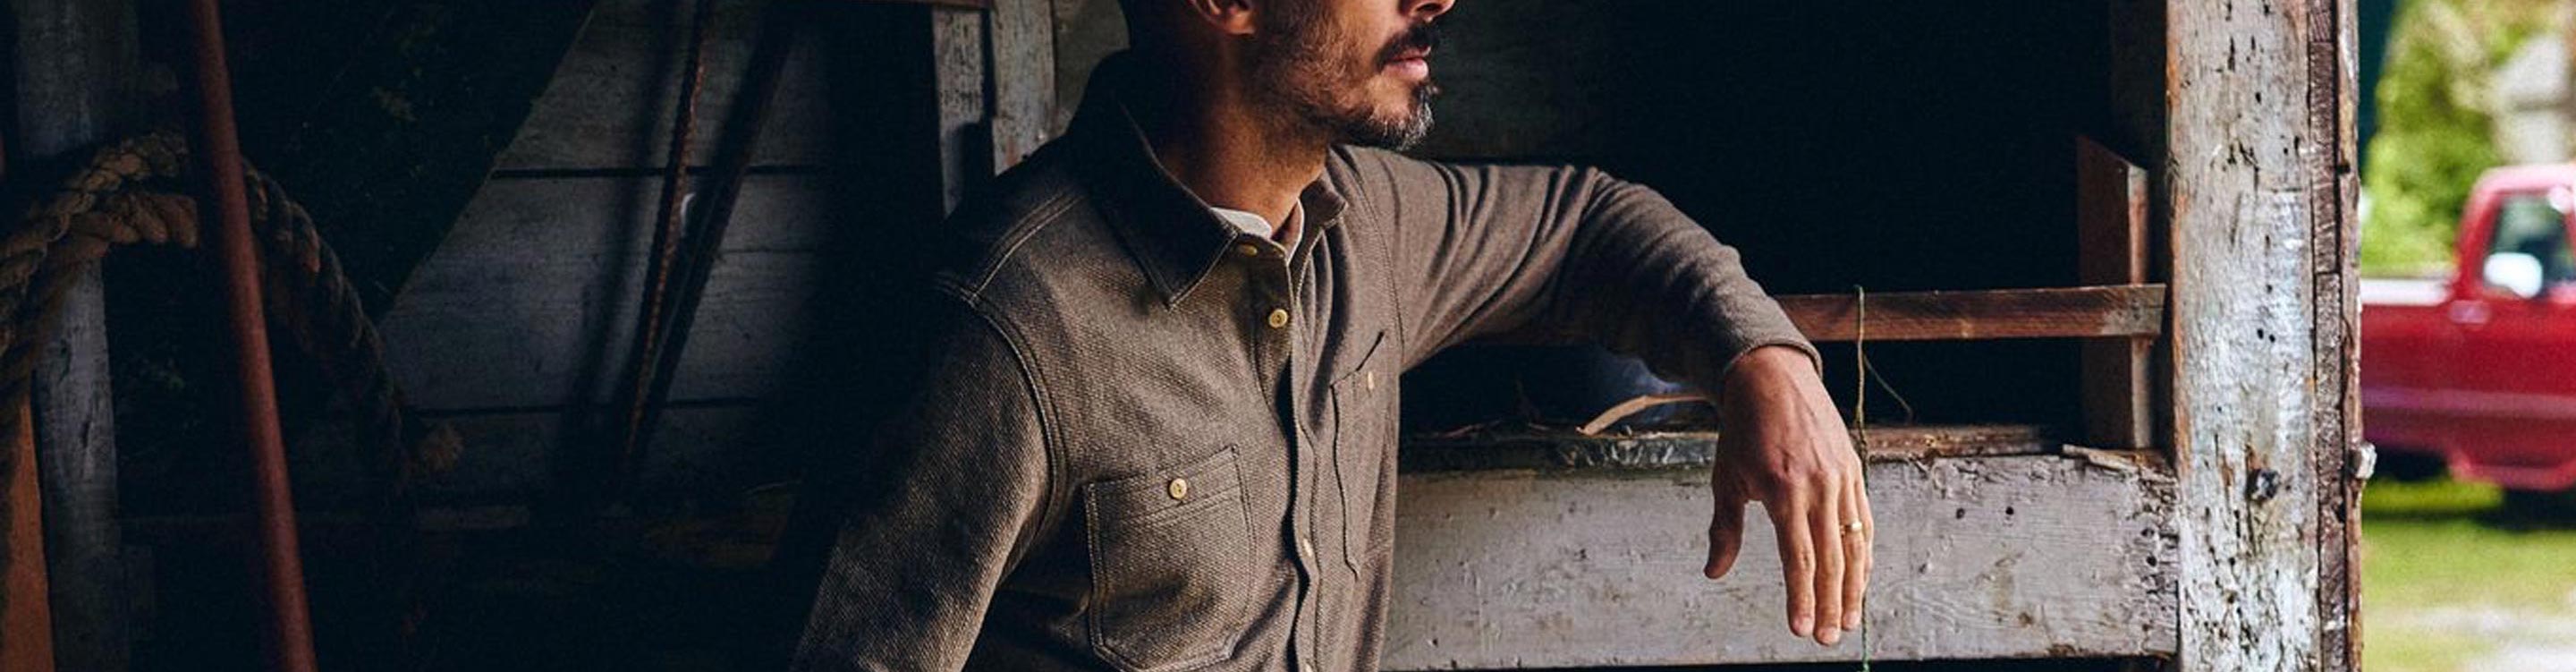 The Utility Shirt in Twill Knit - Knit Shirts for Men | Taylor Stitch | T-Shirts